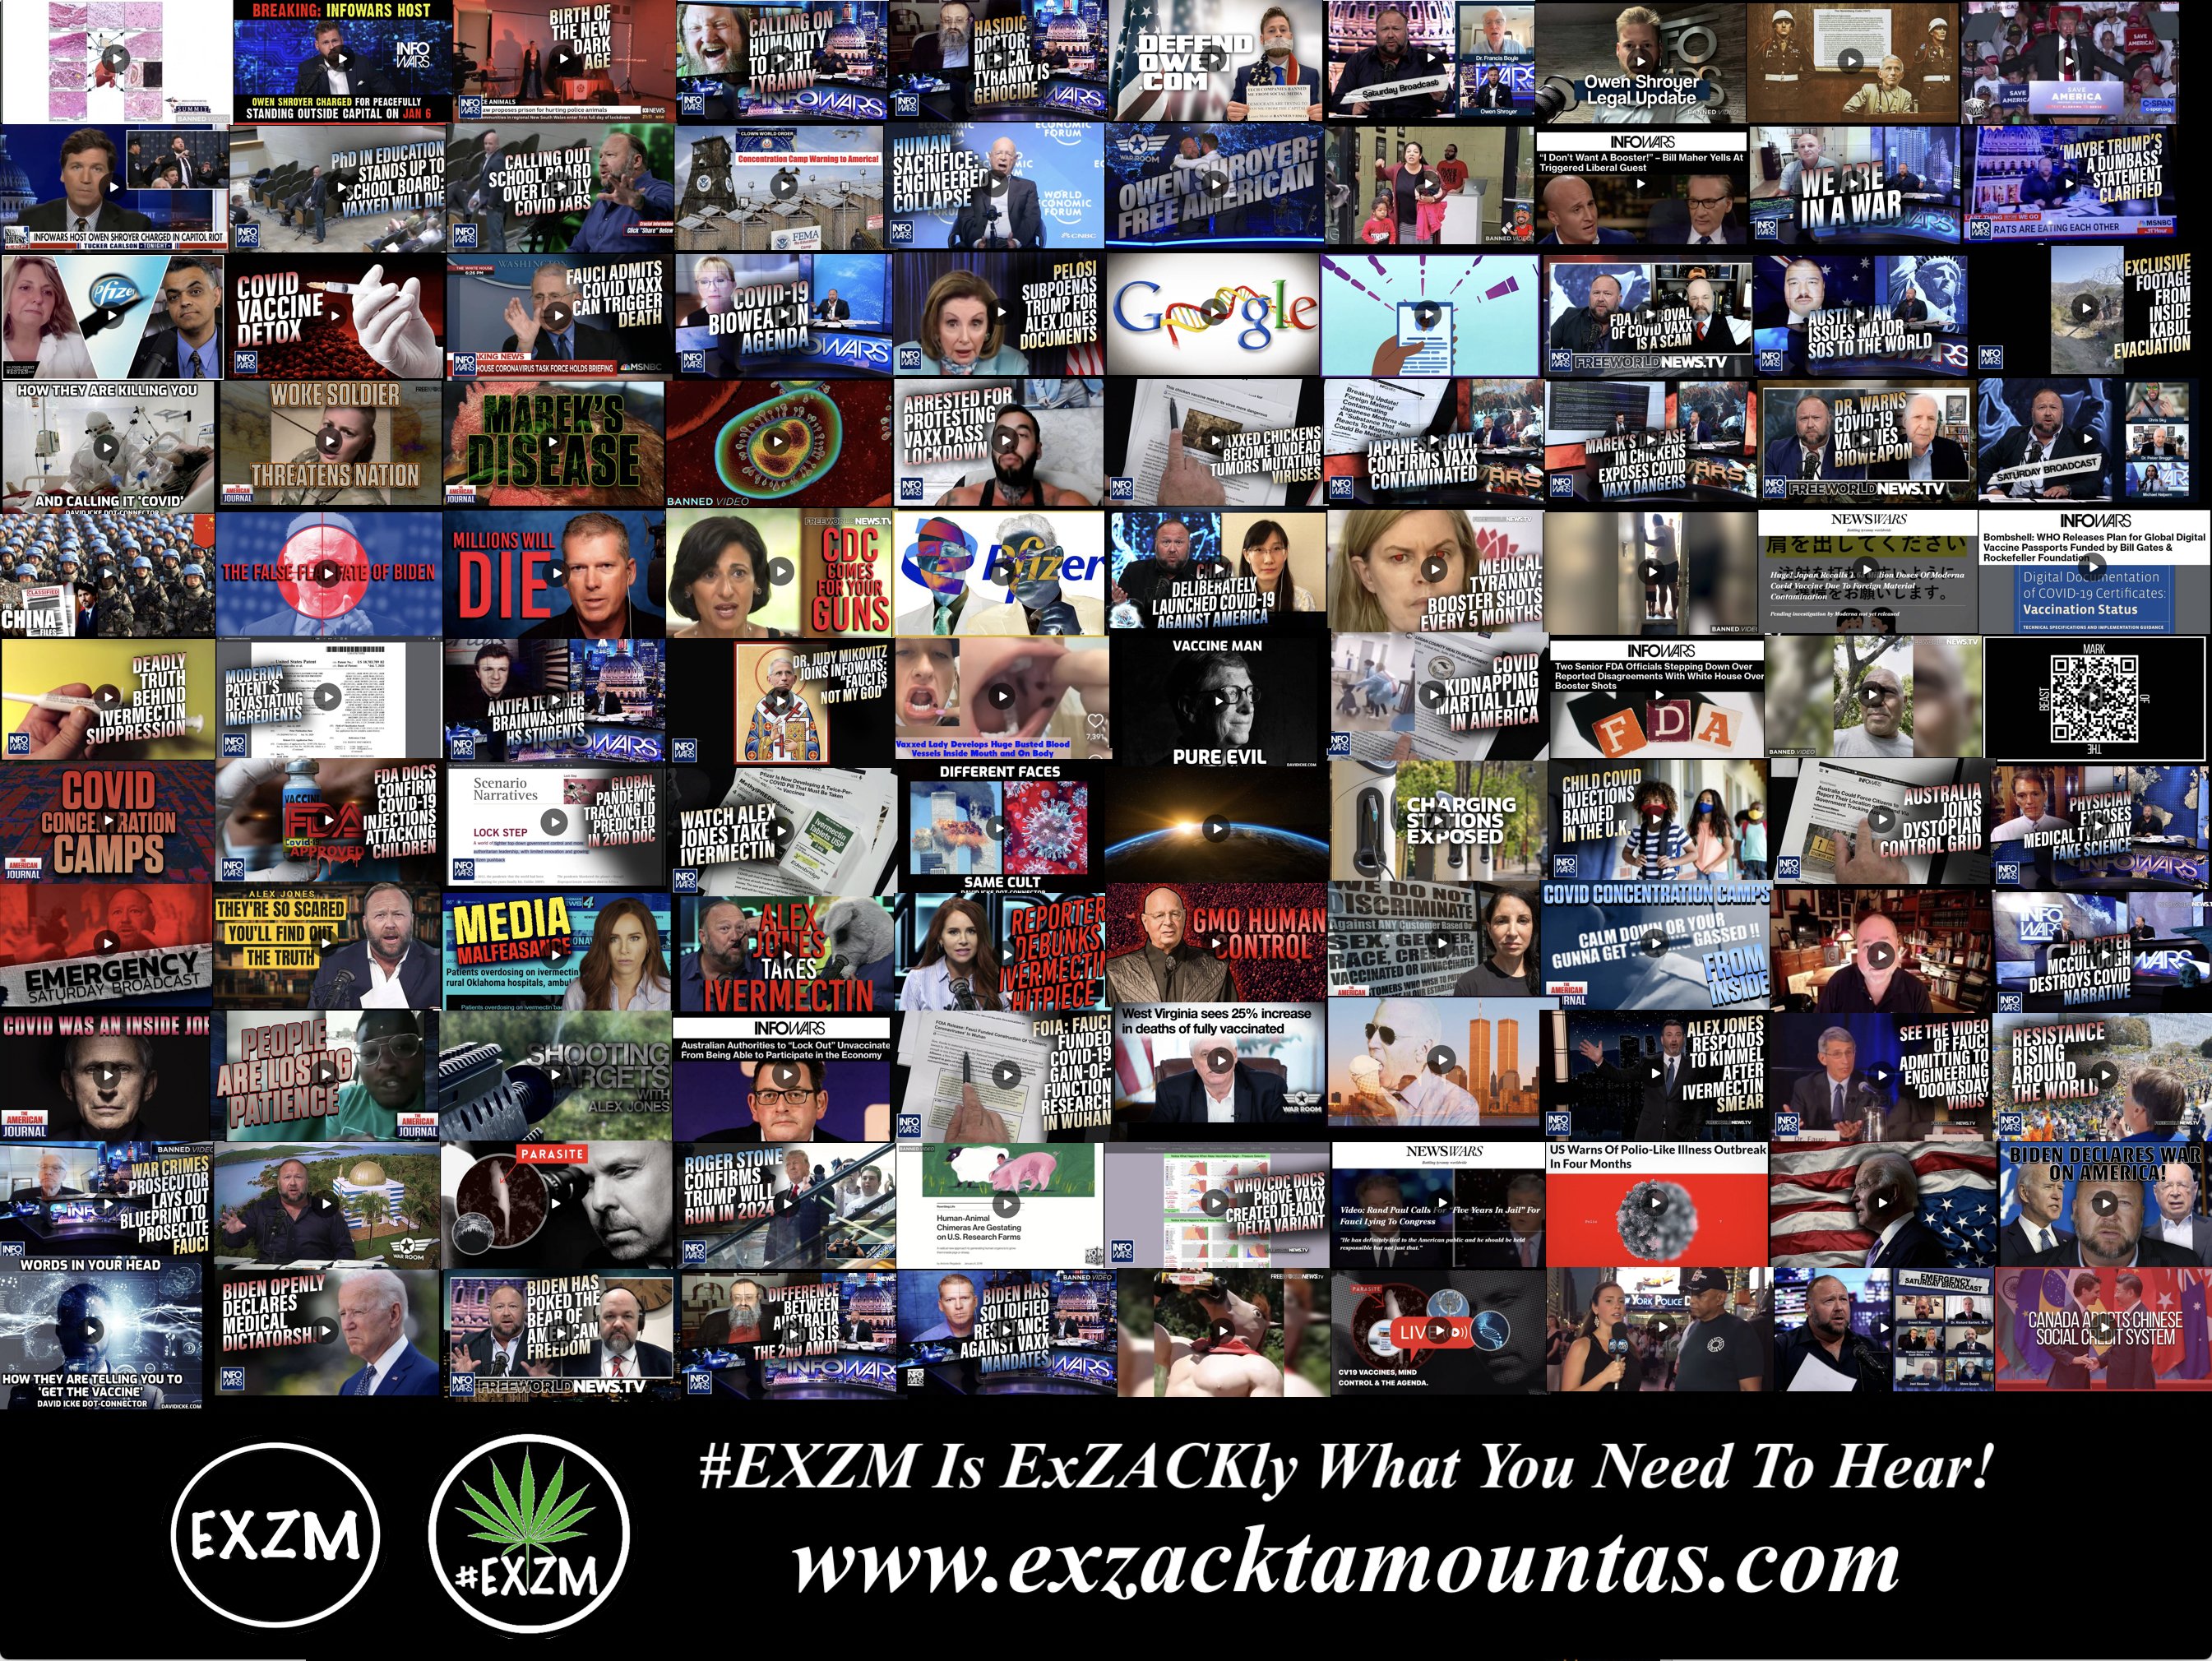 MOST WATCHED VIDEOS ON BANNED VIDEO DEEP STATE GLOBALISTS DEPOPULATION ELECTION FRAUD AND MUCH MORE EXZM Zack Mount August 22nd 2021 page 4